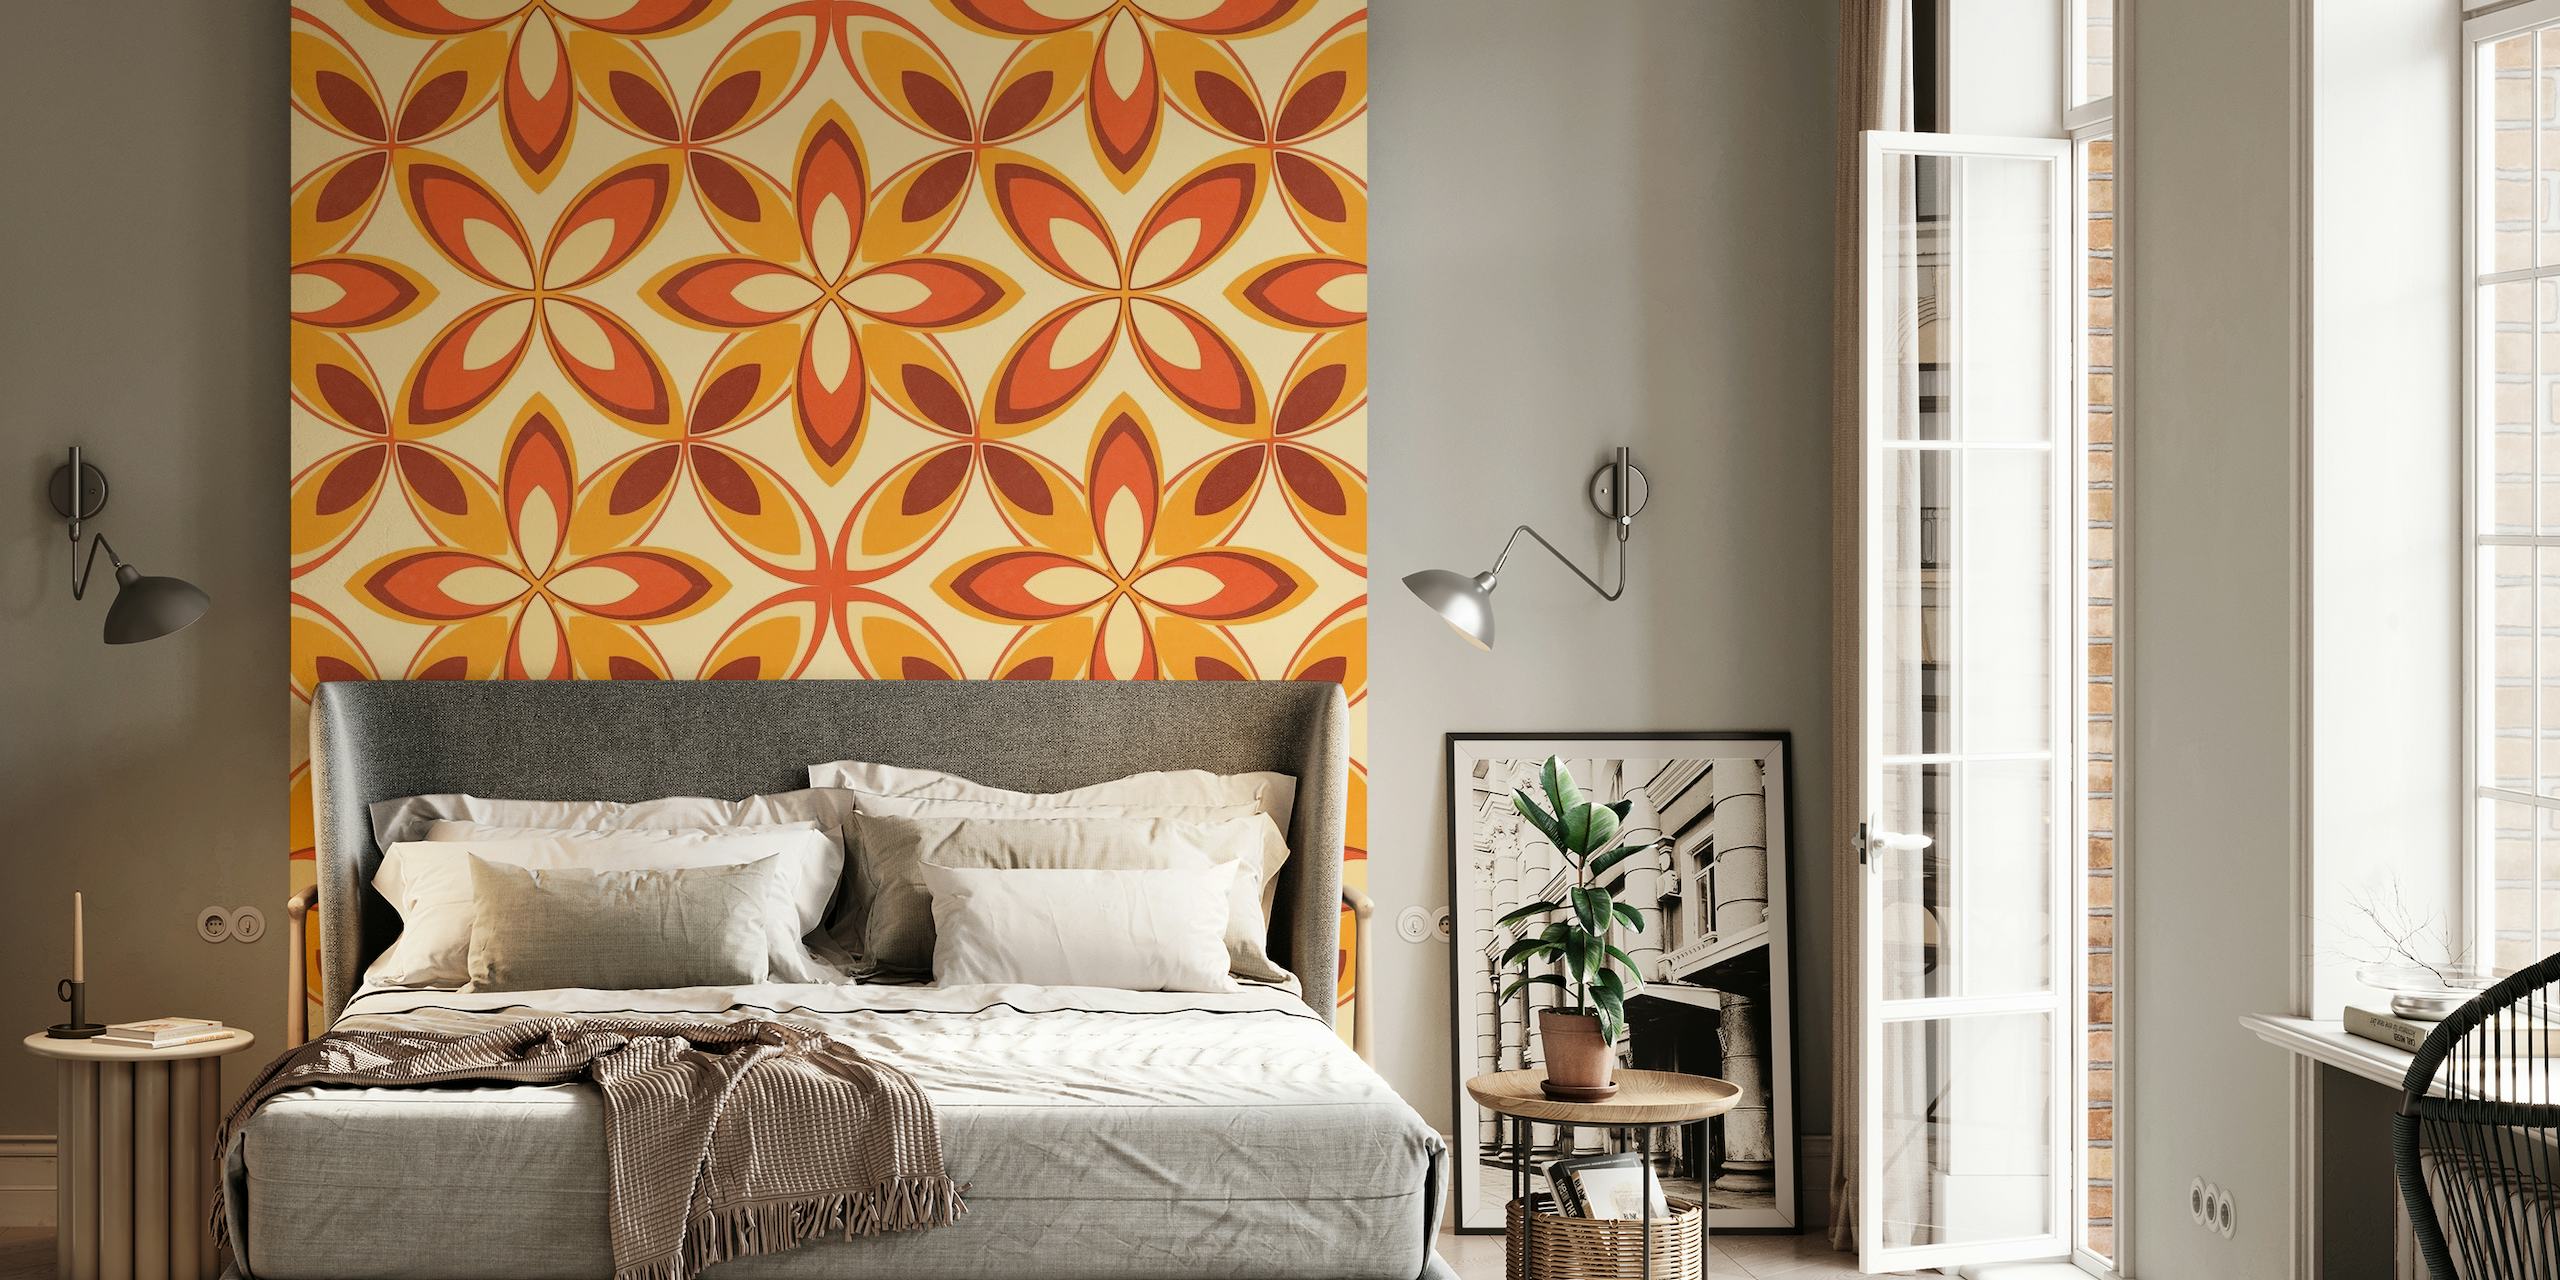 Warm-toned retro-style wall mural with interlocking flower pattern